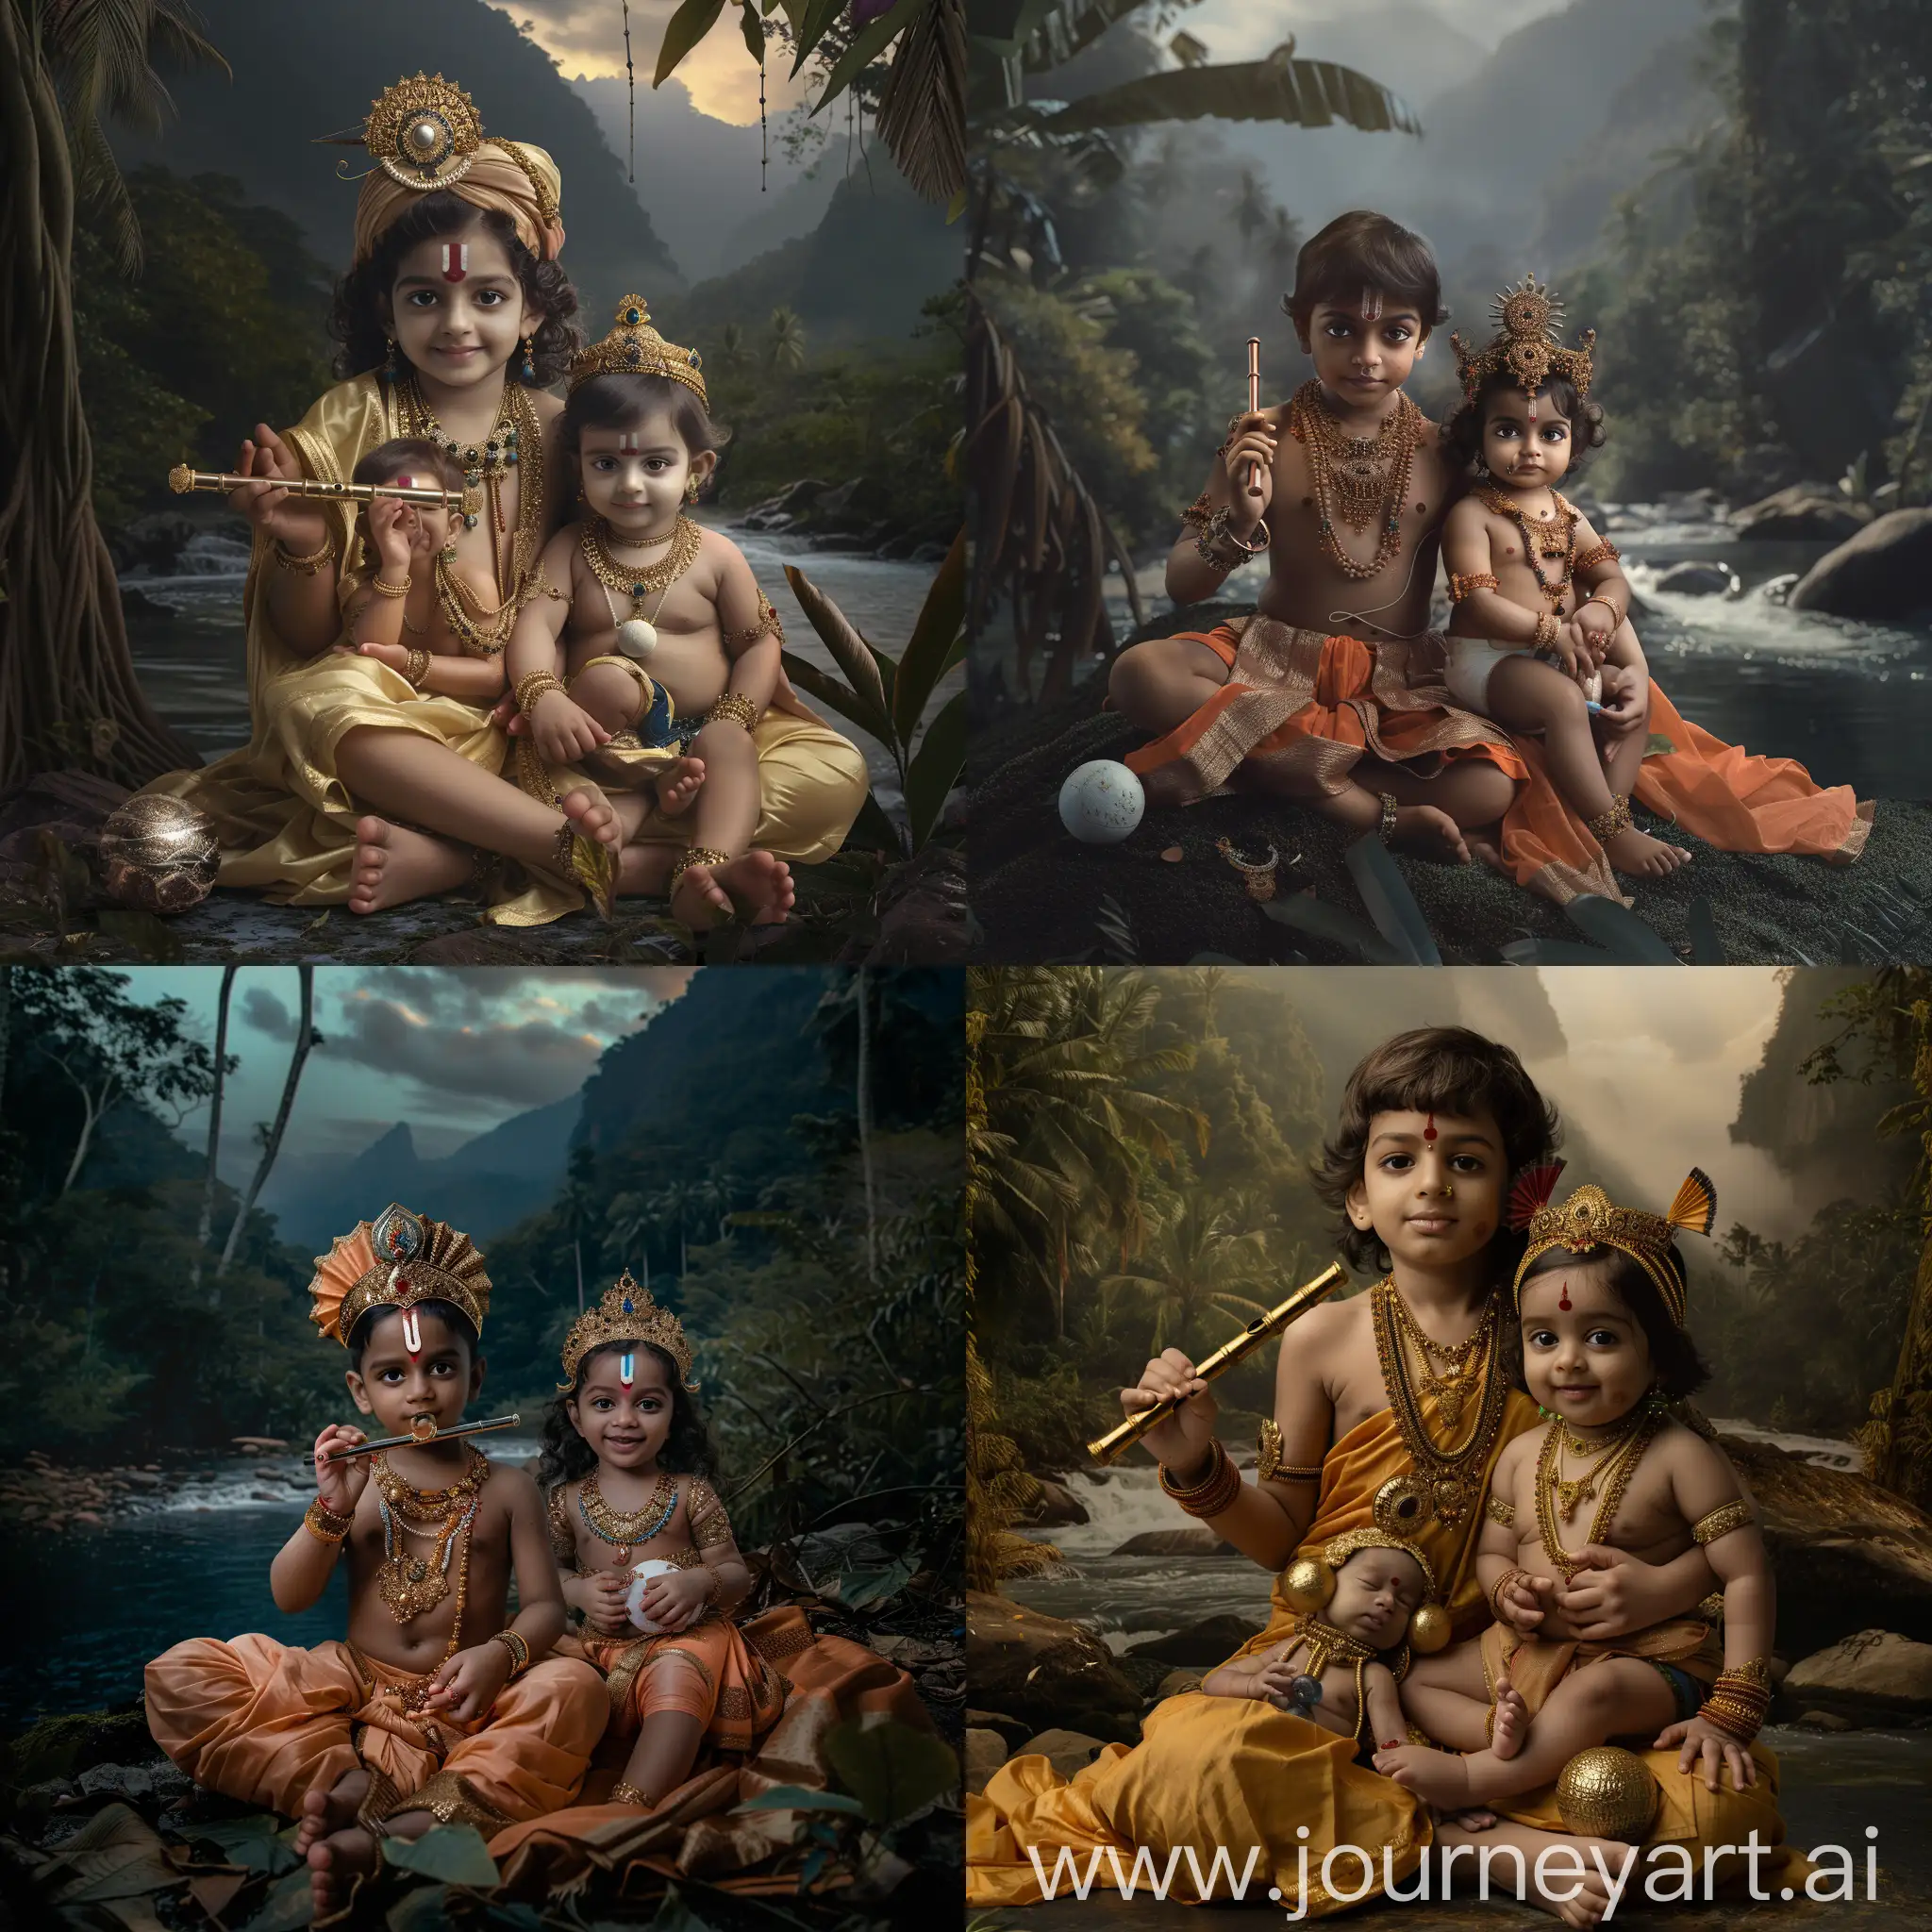 create a 5 years old boy as lord krishna , another 3 year old girl as a goddess lakshmi , and small baby as a lord murugan sitting on goddess lakshmi’s lap , Gods dress sitting in middle of the jungle , river , behind mountains, trees , dark shadows ,  , divine , majestic eyes , jewels, anklets , baby. krishnar holding flute in hand , goddess lakshmi holding murugan on her lap , cute smile , baby murugan wearing jewels , smile , crown , sphere on hand ,photorealistic 4k image